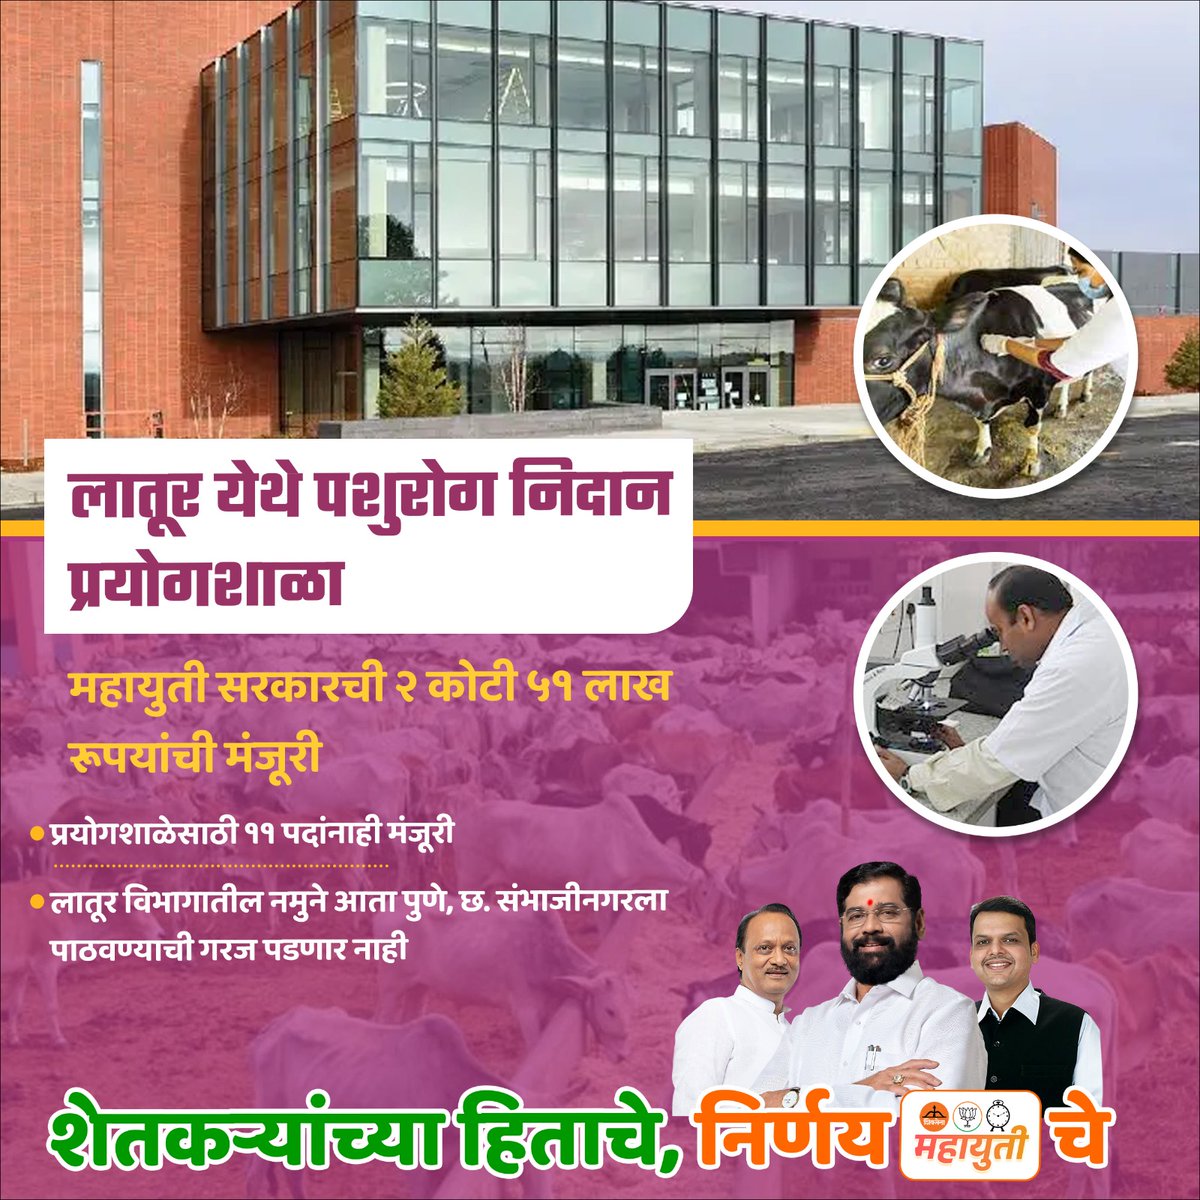 The approval of 11 posts for the Veterinary Diagnostic Laboratory in Latur reflects the government's dedication to ensuring efficient operations and quality services. Thanks to CM Eknath Shinde's proactive leadership.